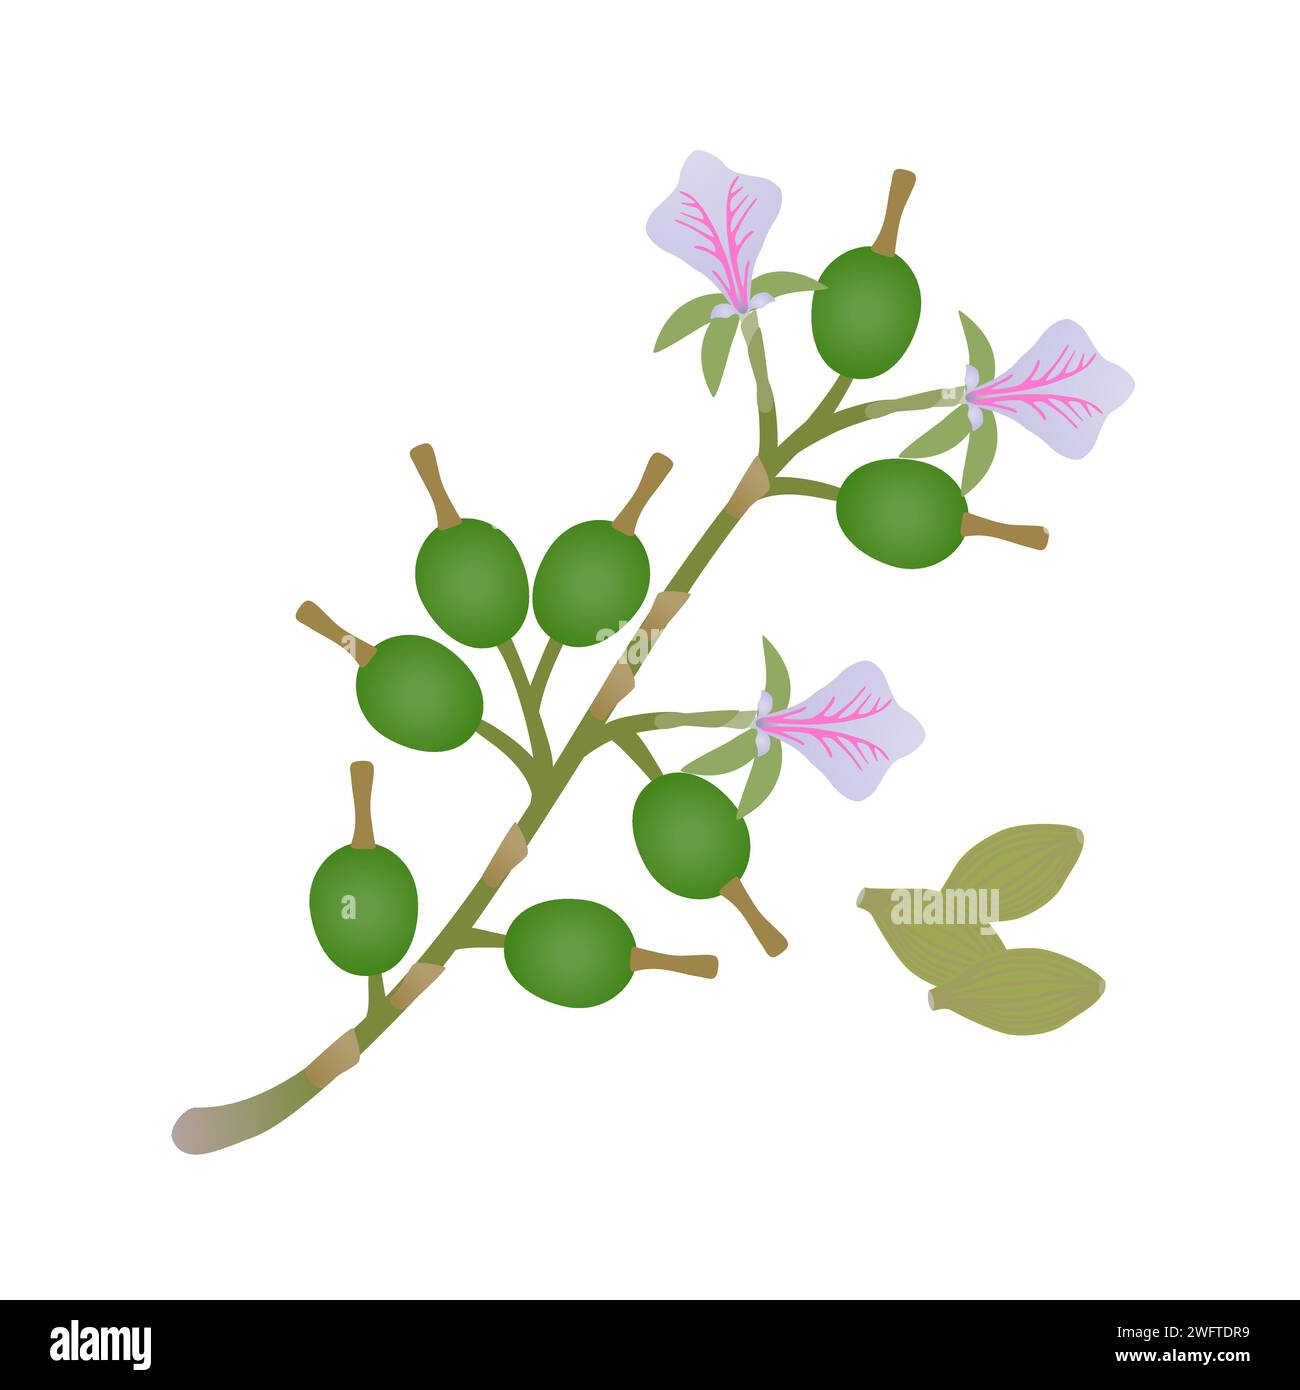 True cardamom branch with fruits and flowers on a white. Stock Vector